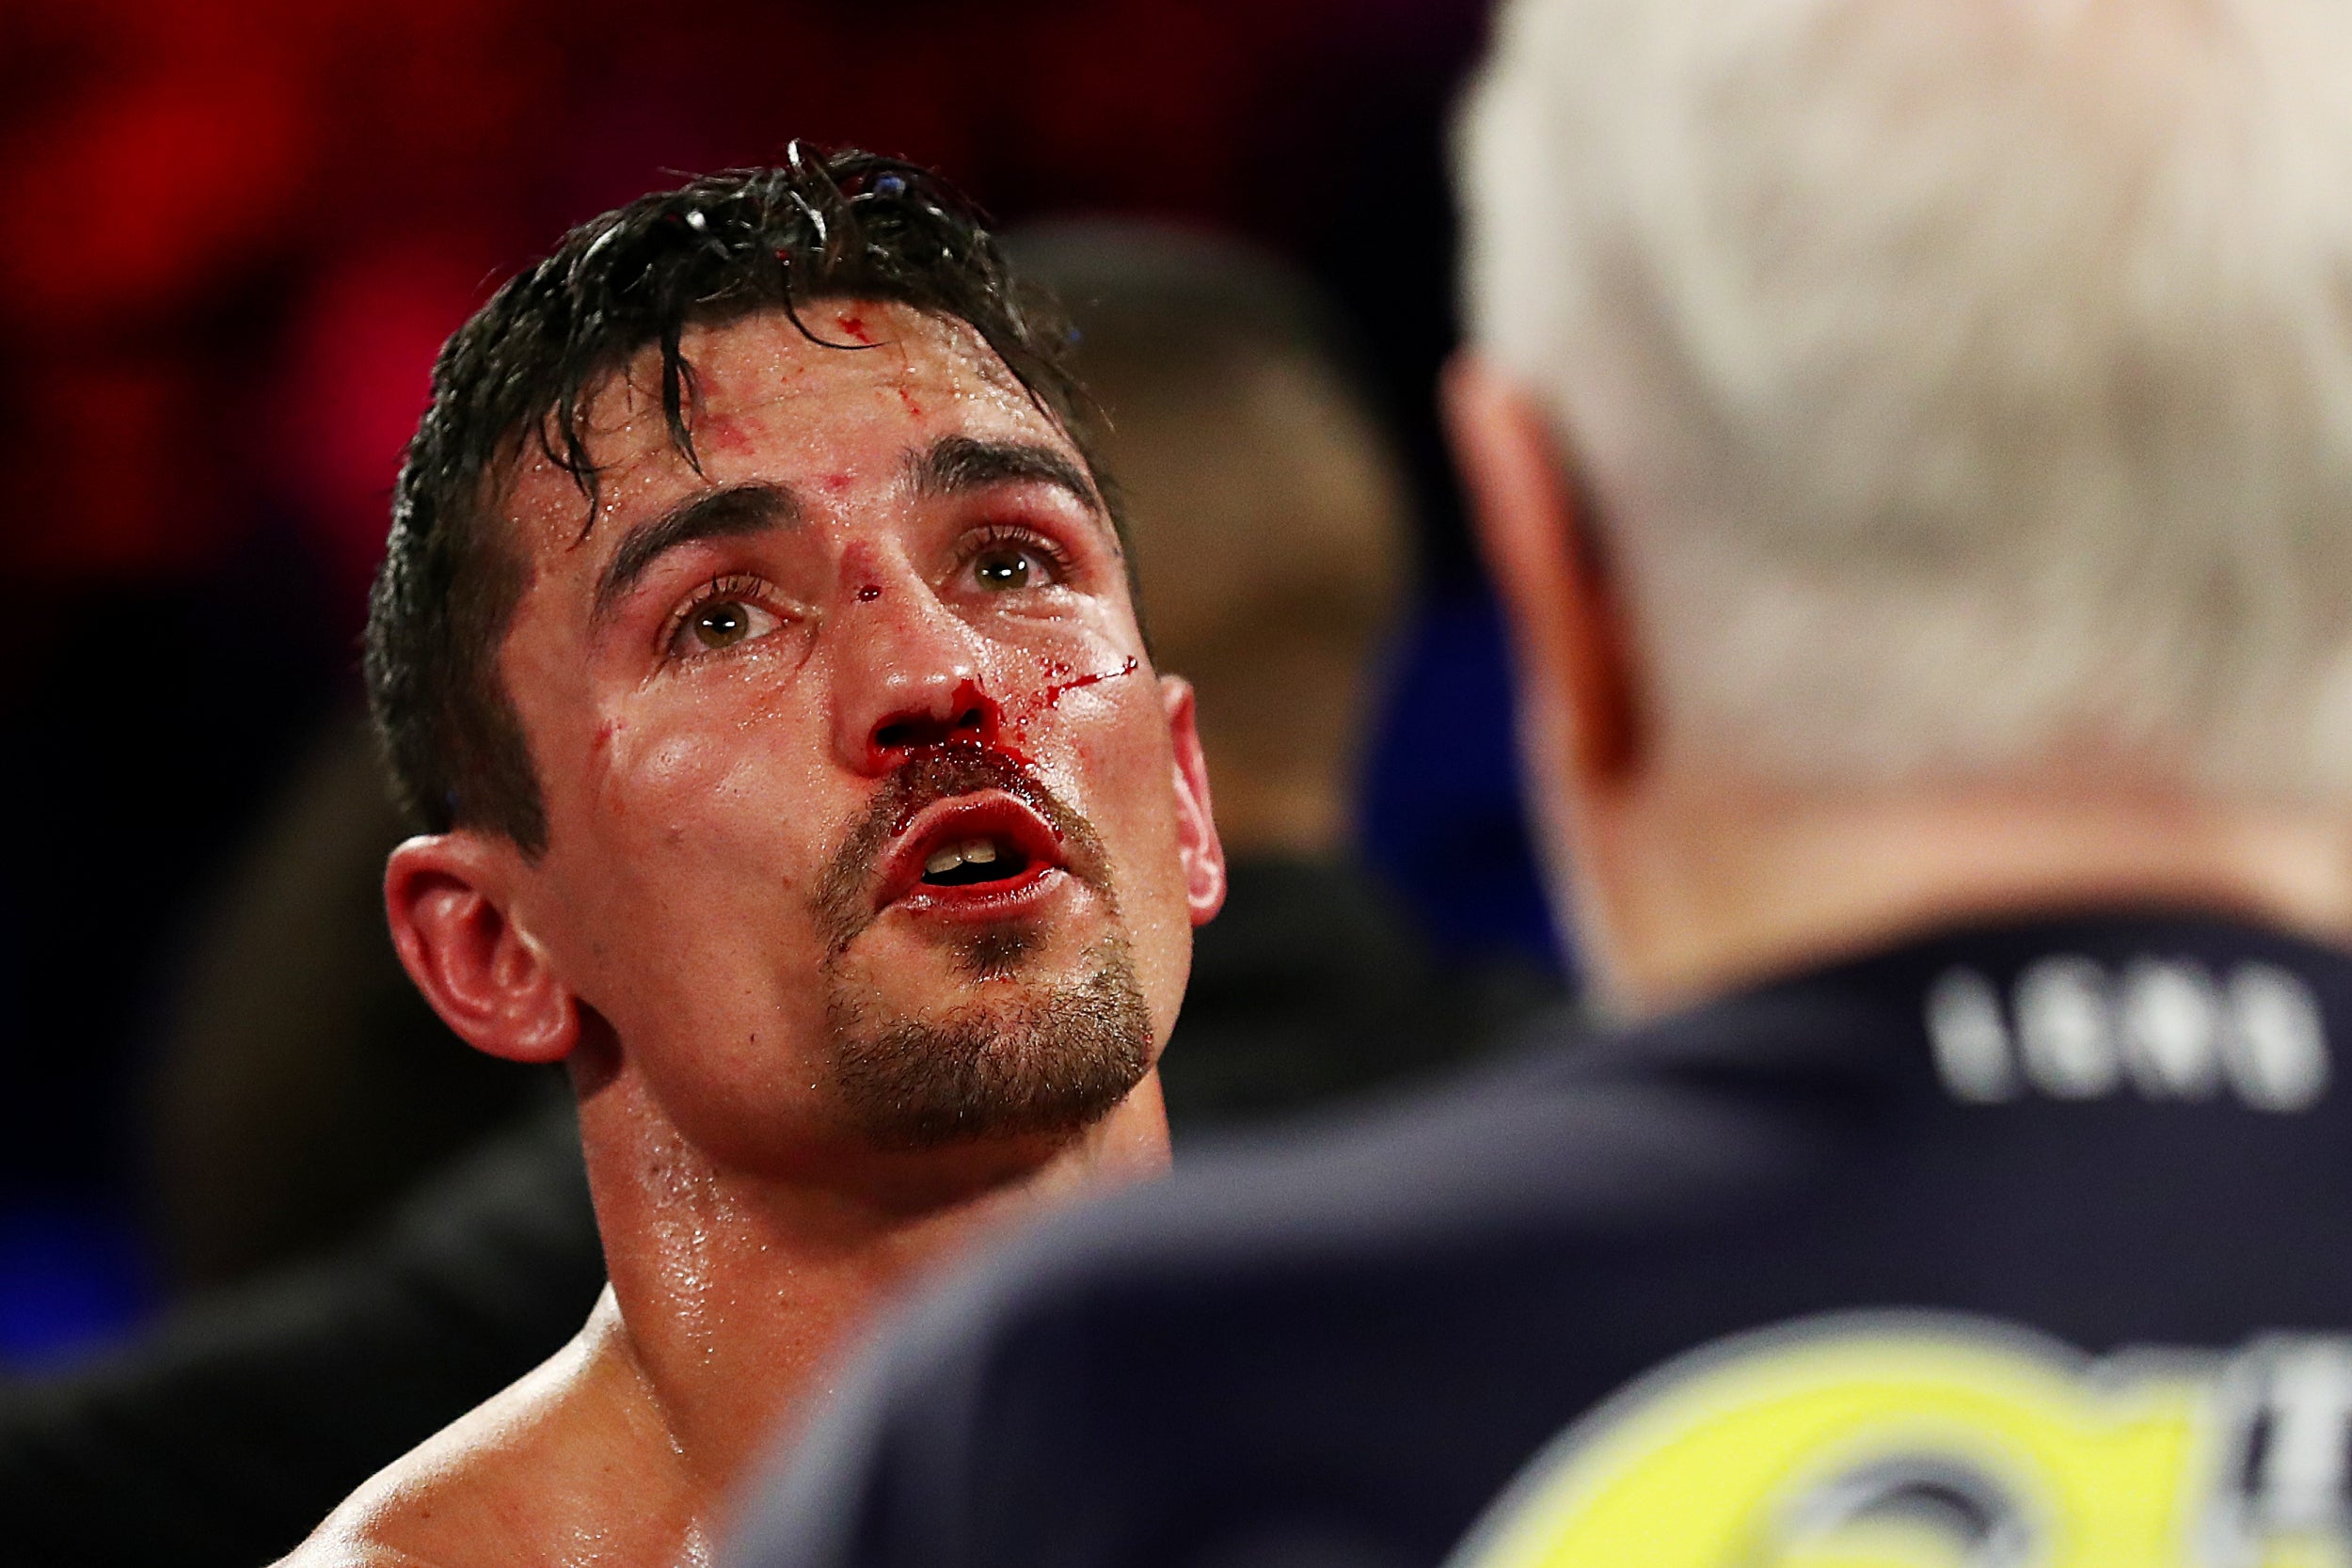 Crolla was knocked out in the fourth